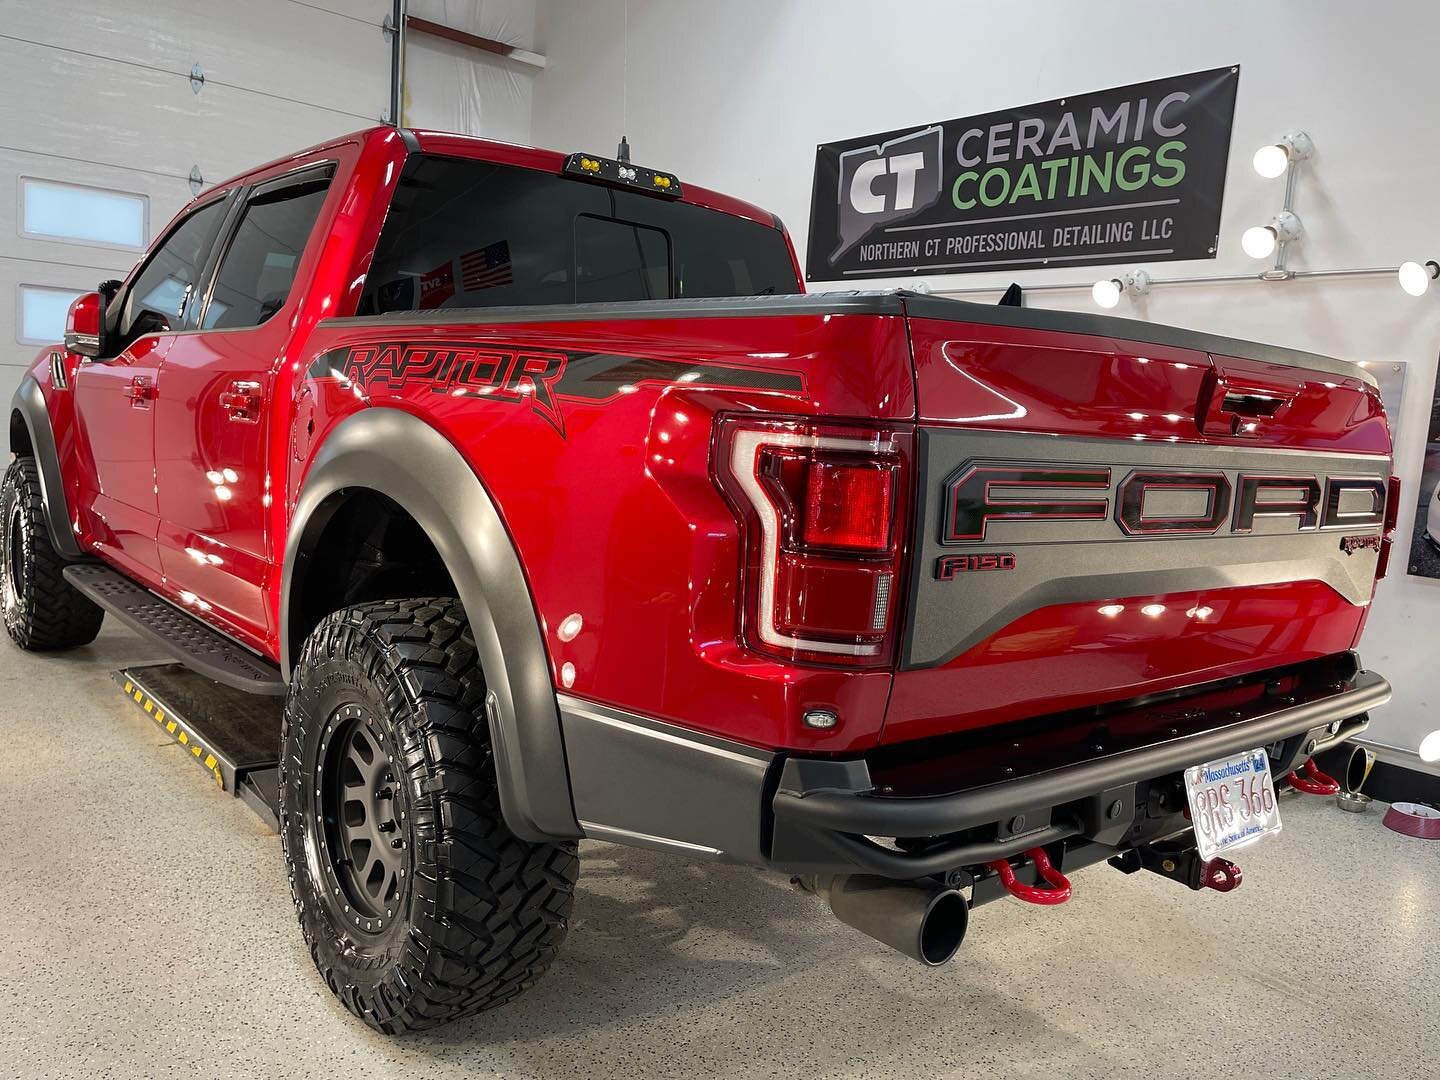 Level 3 +Tints
2021 Raptor

Our level 3 package is our signature and top tier package where we go after all of the paint defects possible with multiple paint correction steps to achieve the best finish possible. 

Once paint is corrected to our stand